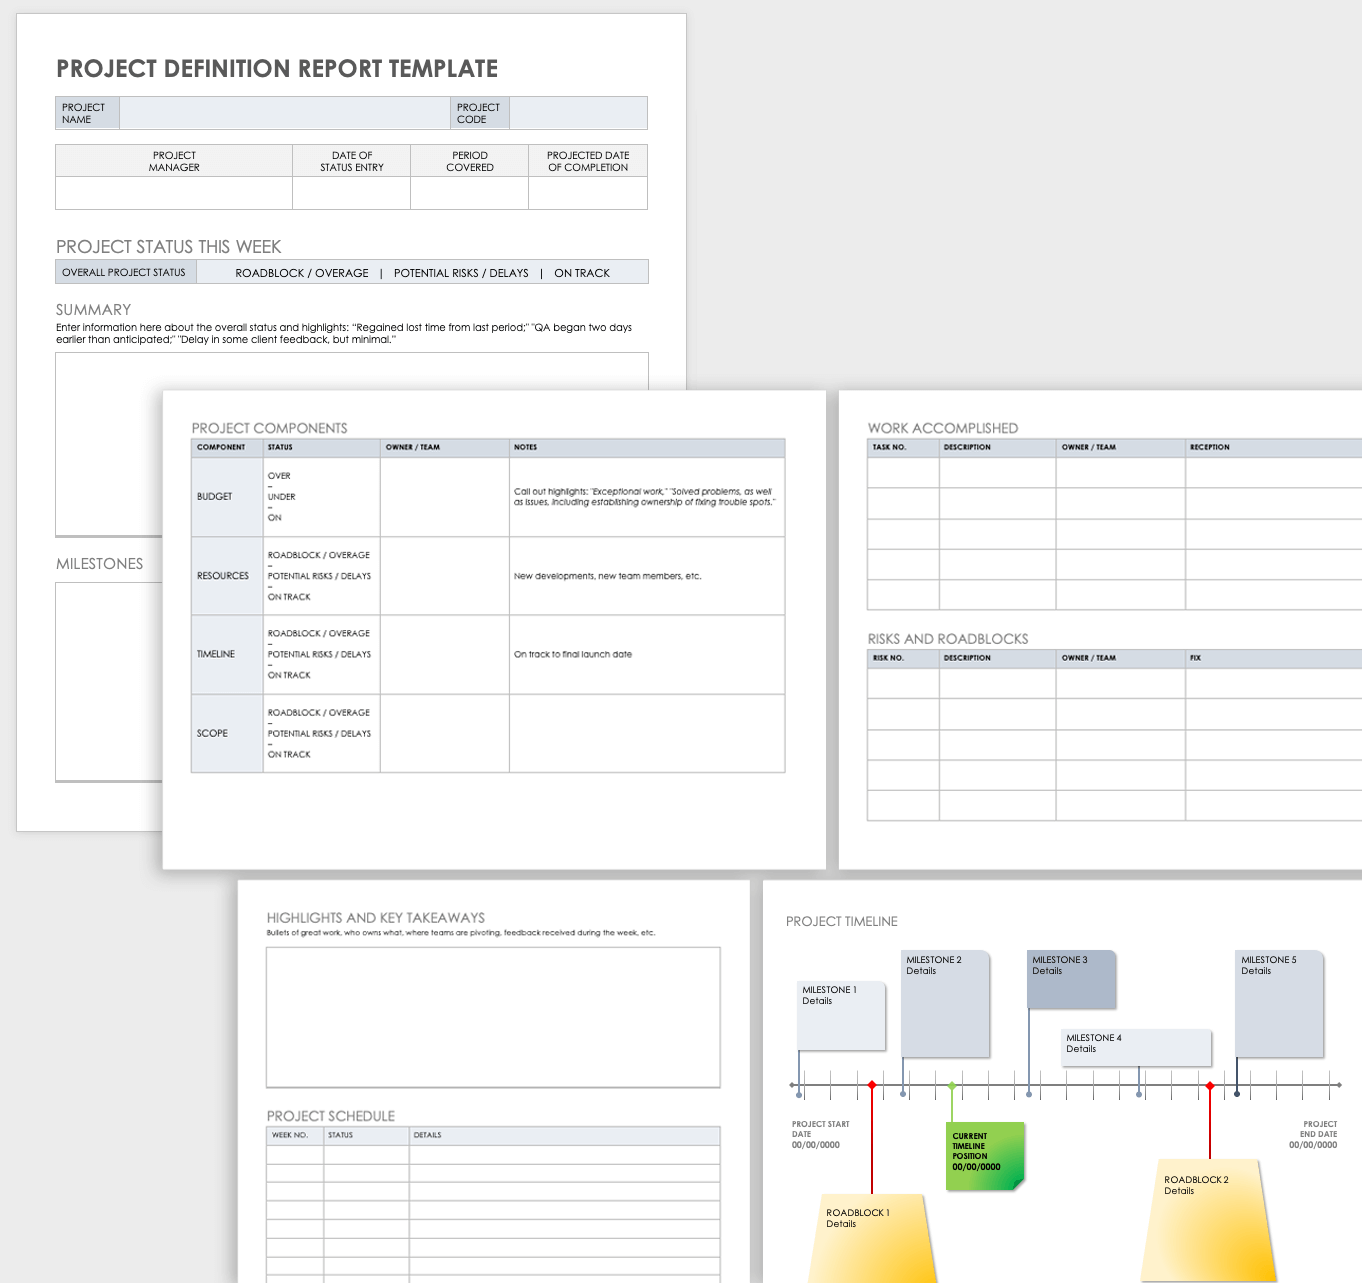 Project Definition Report Template